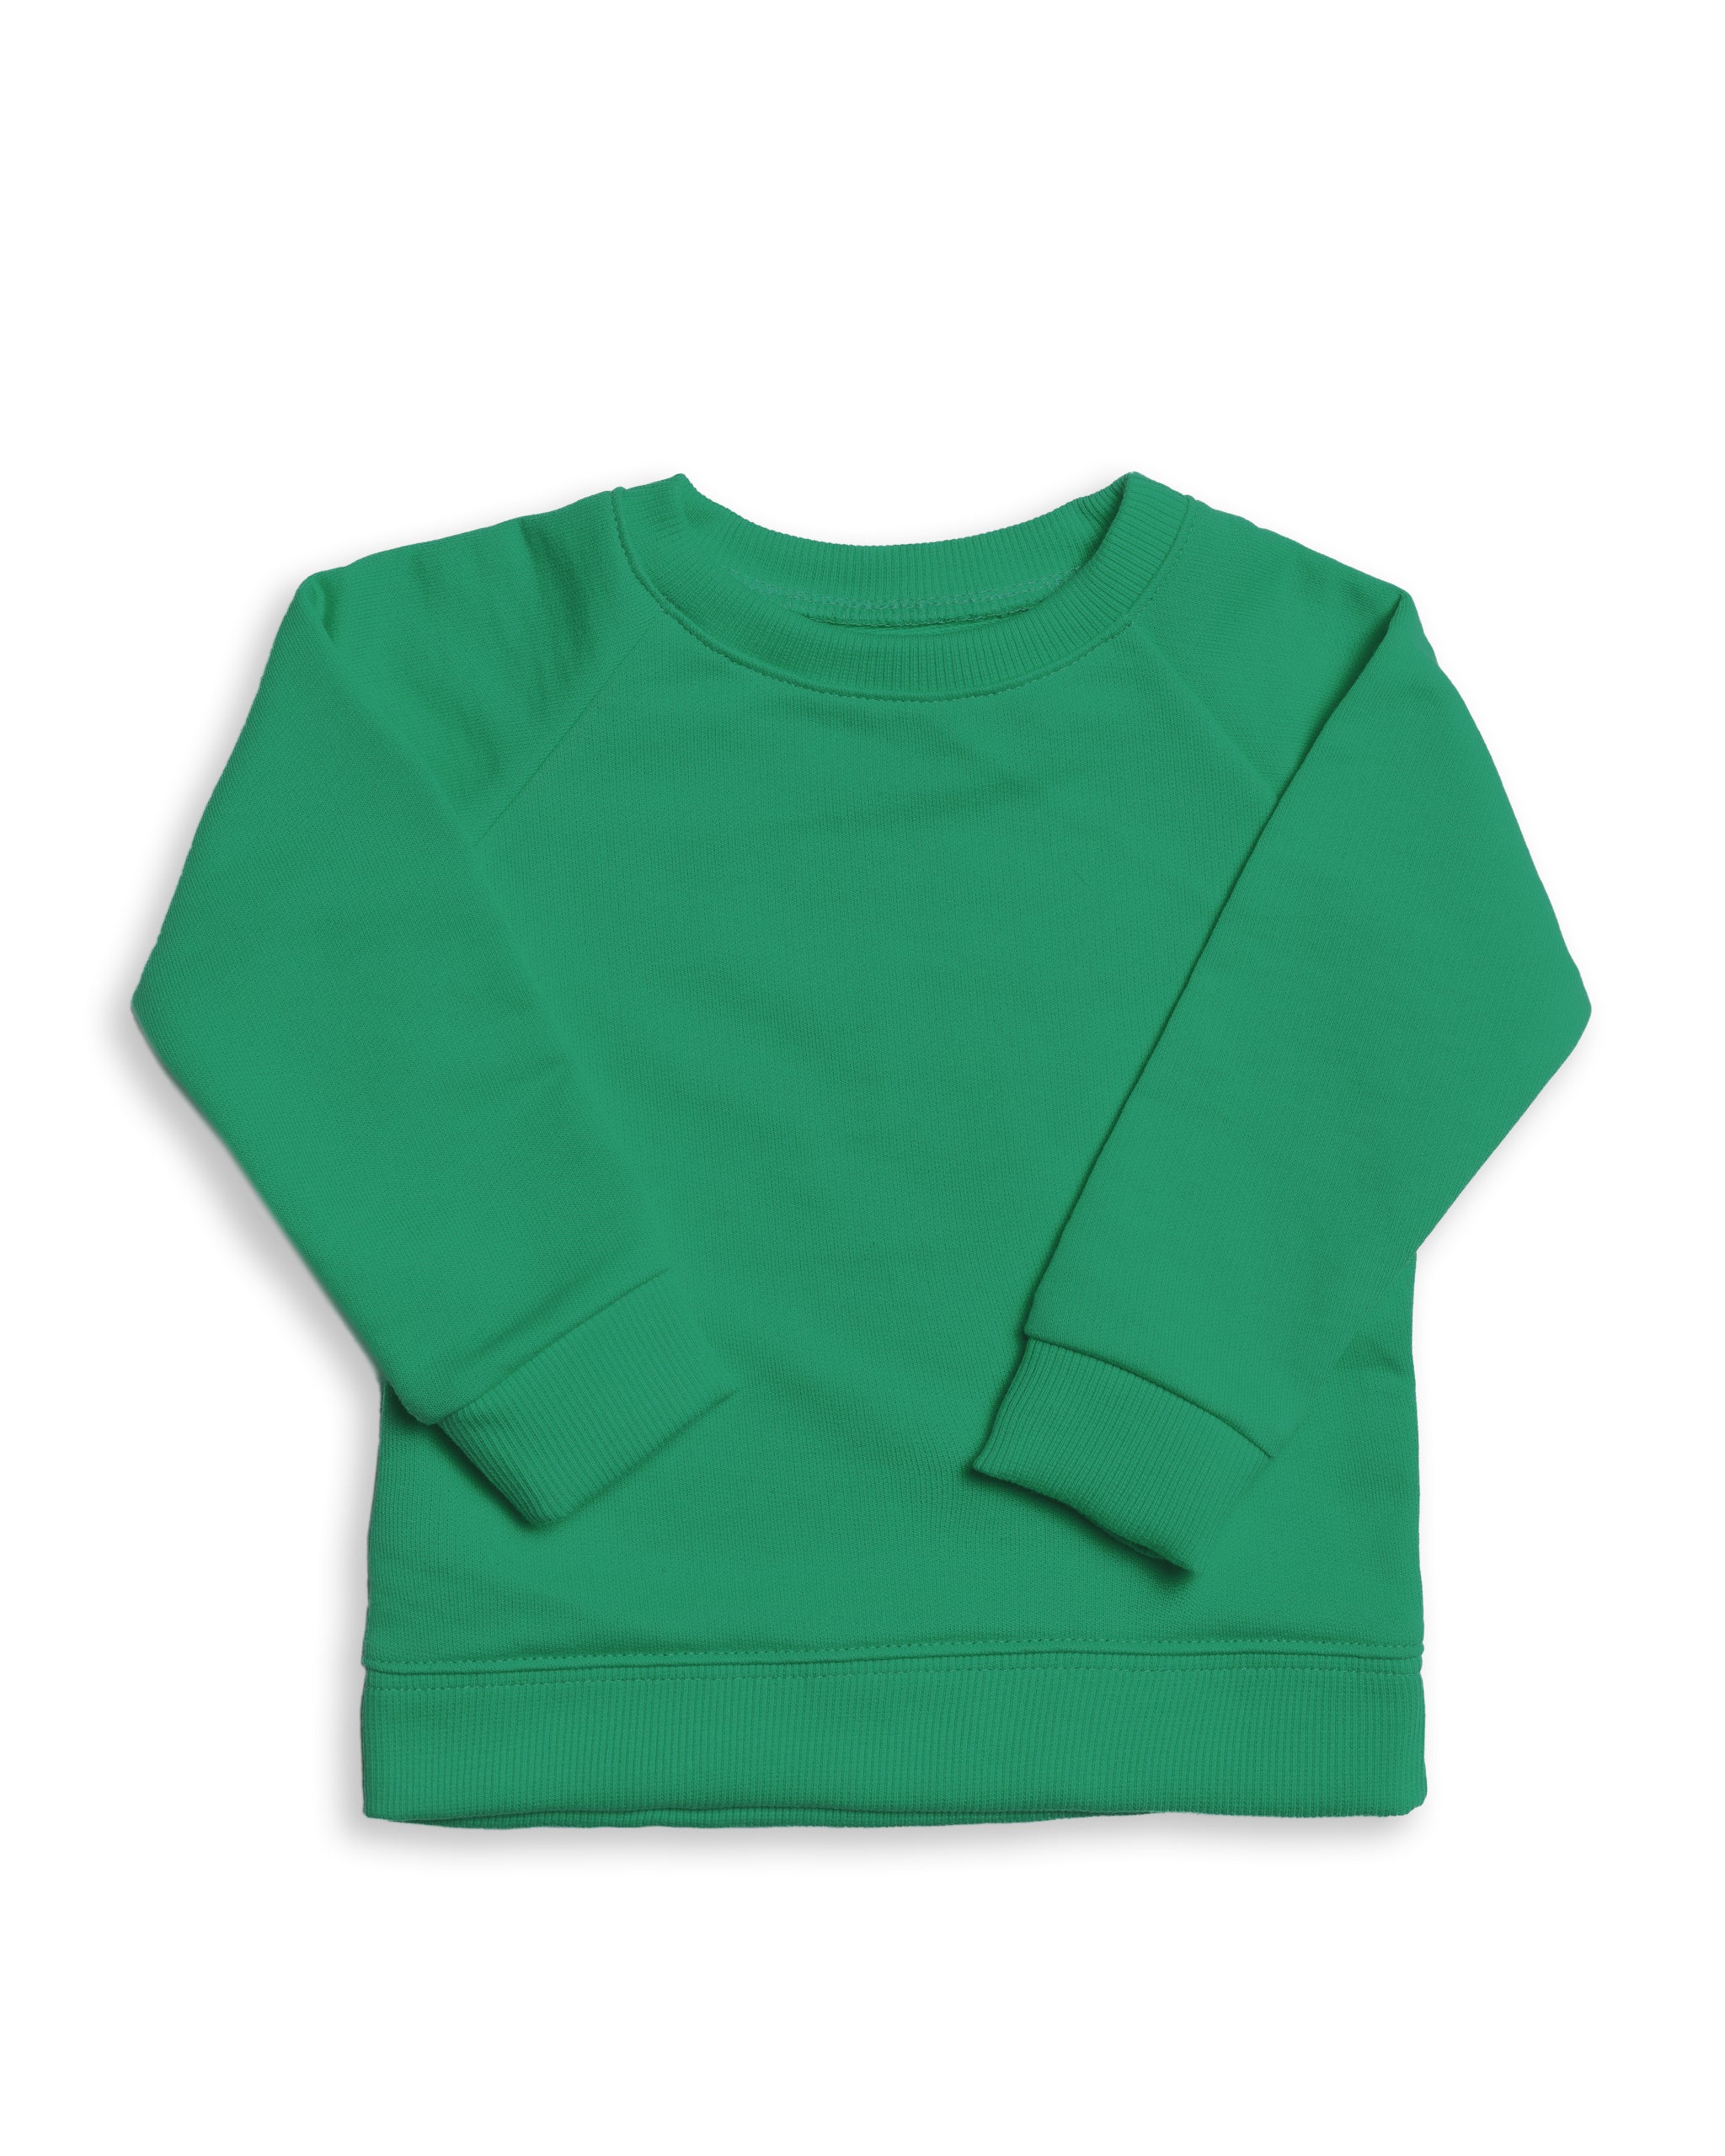 The Organic Pullover Sweatshirt #color_Jelly Bean